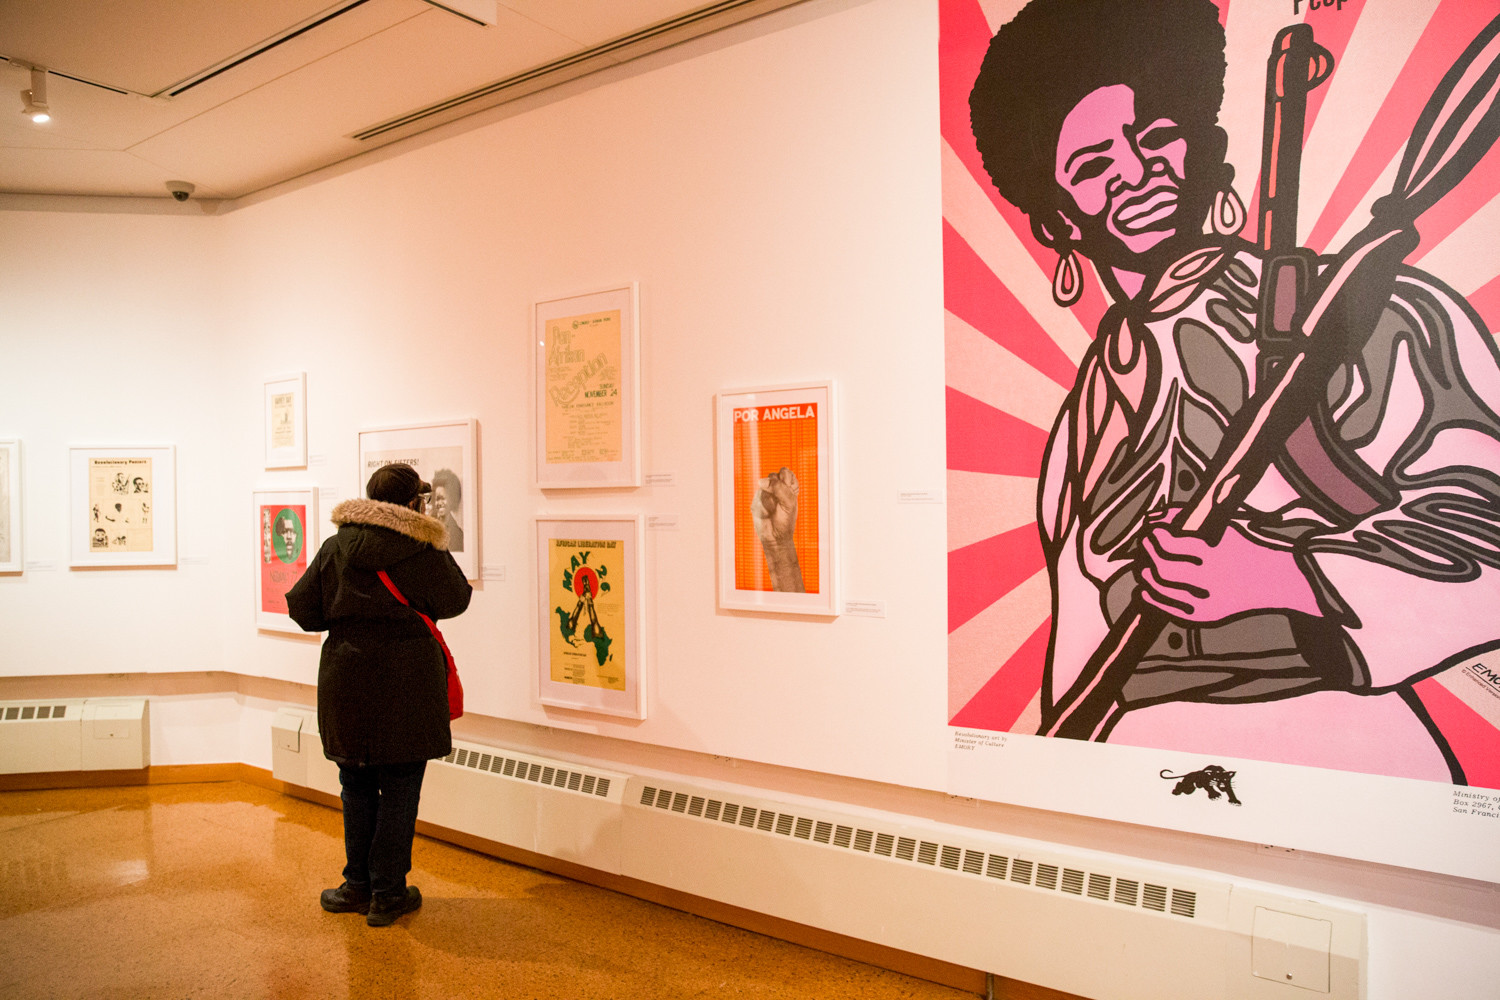 The posters in the ‘Power in Print’ exhibition at the Schomburg Center have a mix of design styles and aesthetics. Some were made with great attention to typefaces and layout, while others were created to share news of art and culture gatherings or notices of political rallies.